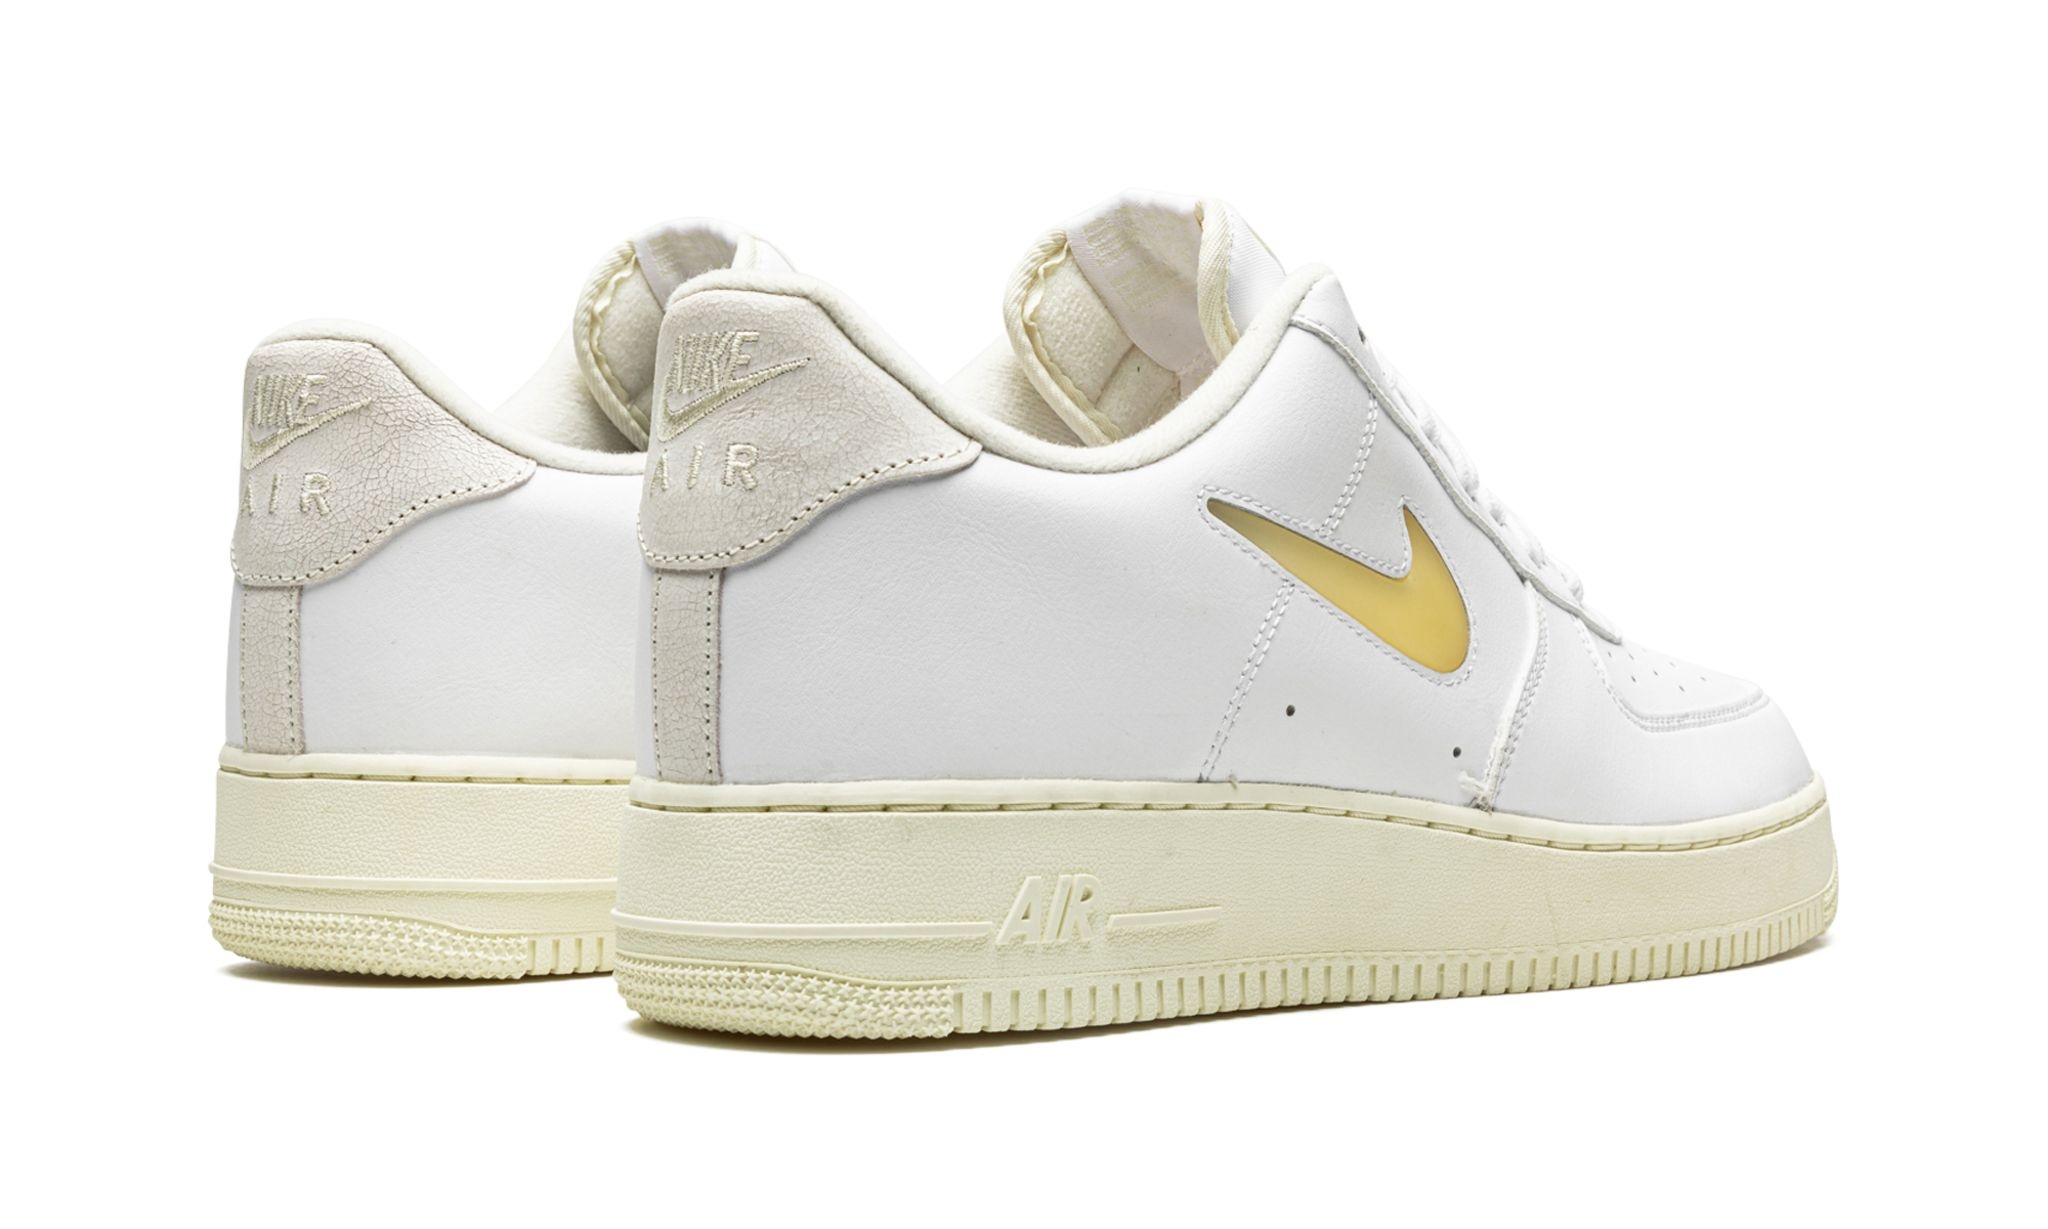 Air Force 1 Low Jewel "White/Pale Vanilla" - 3